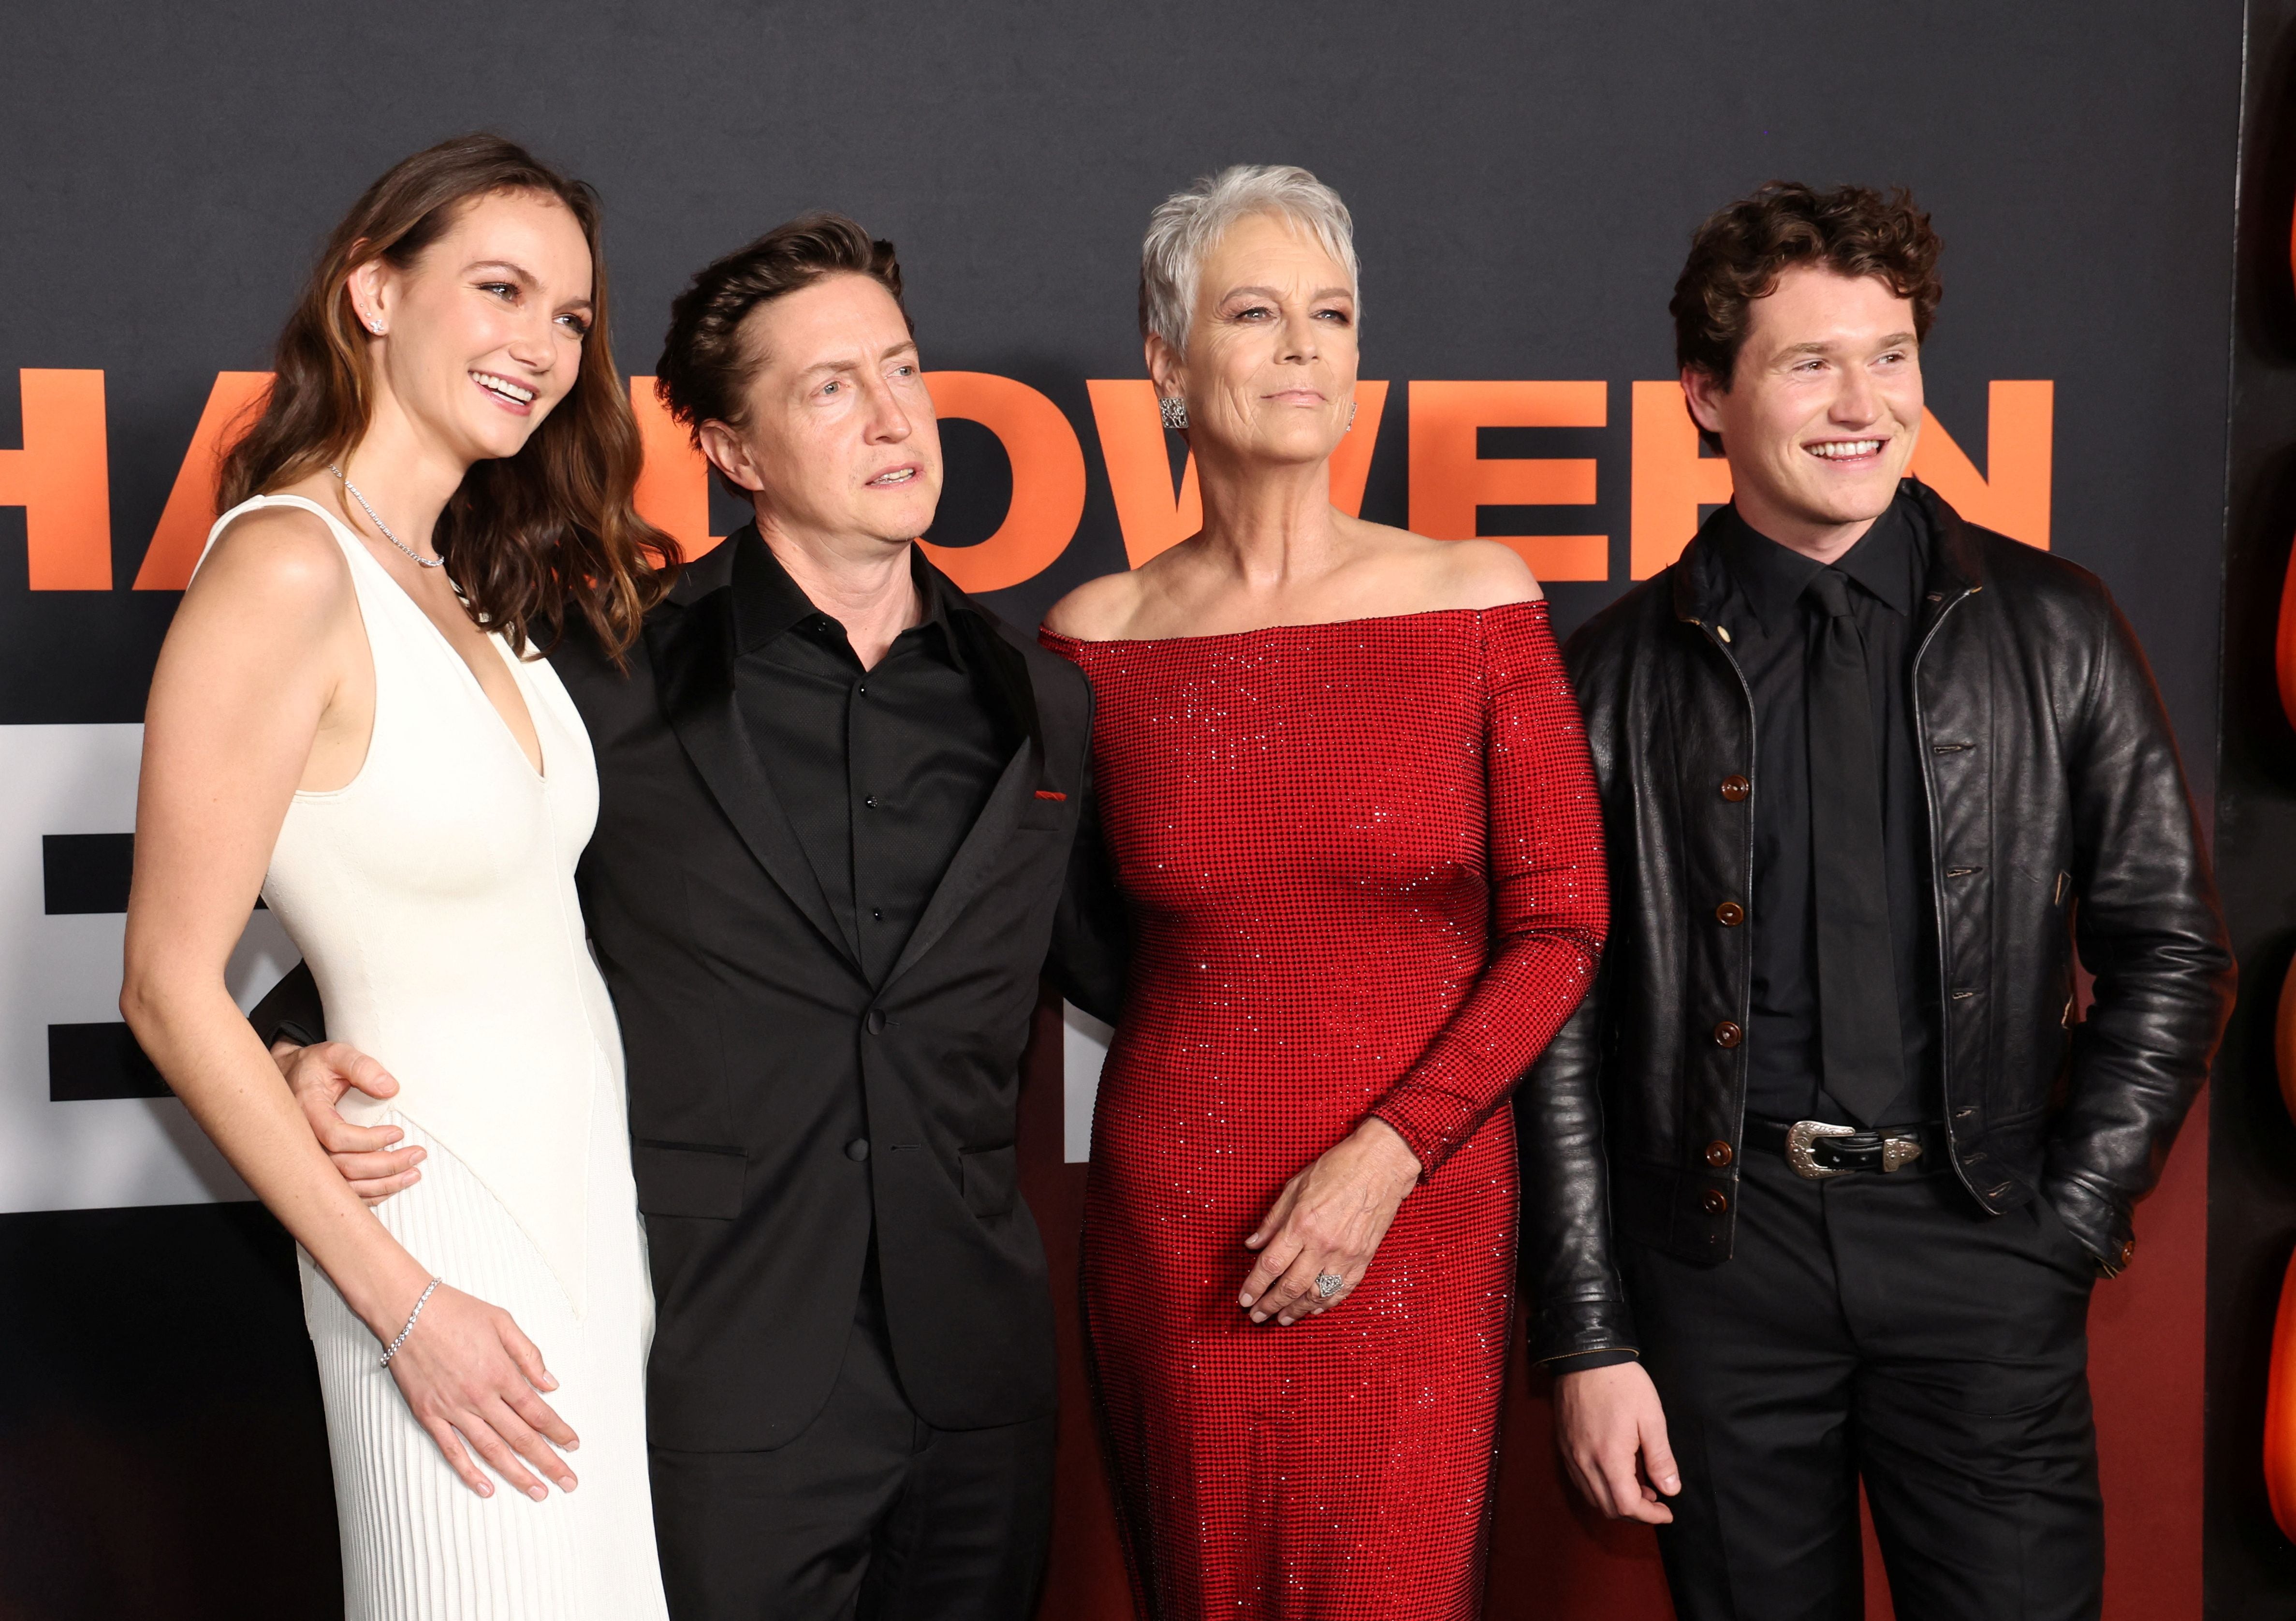 Director David Gordon Green and cast members Jamie Lee Curtis, Rohan Campbell and Andi Matichak attend a premiere for the film "Halloween Ends" in Los Angeles, California, US, October 11, 2022. REUTERS/Mario Anzuoni